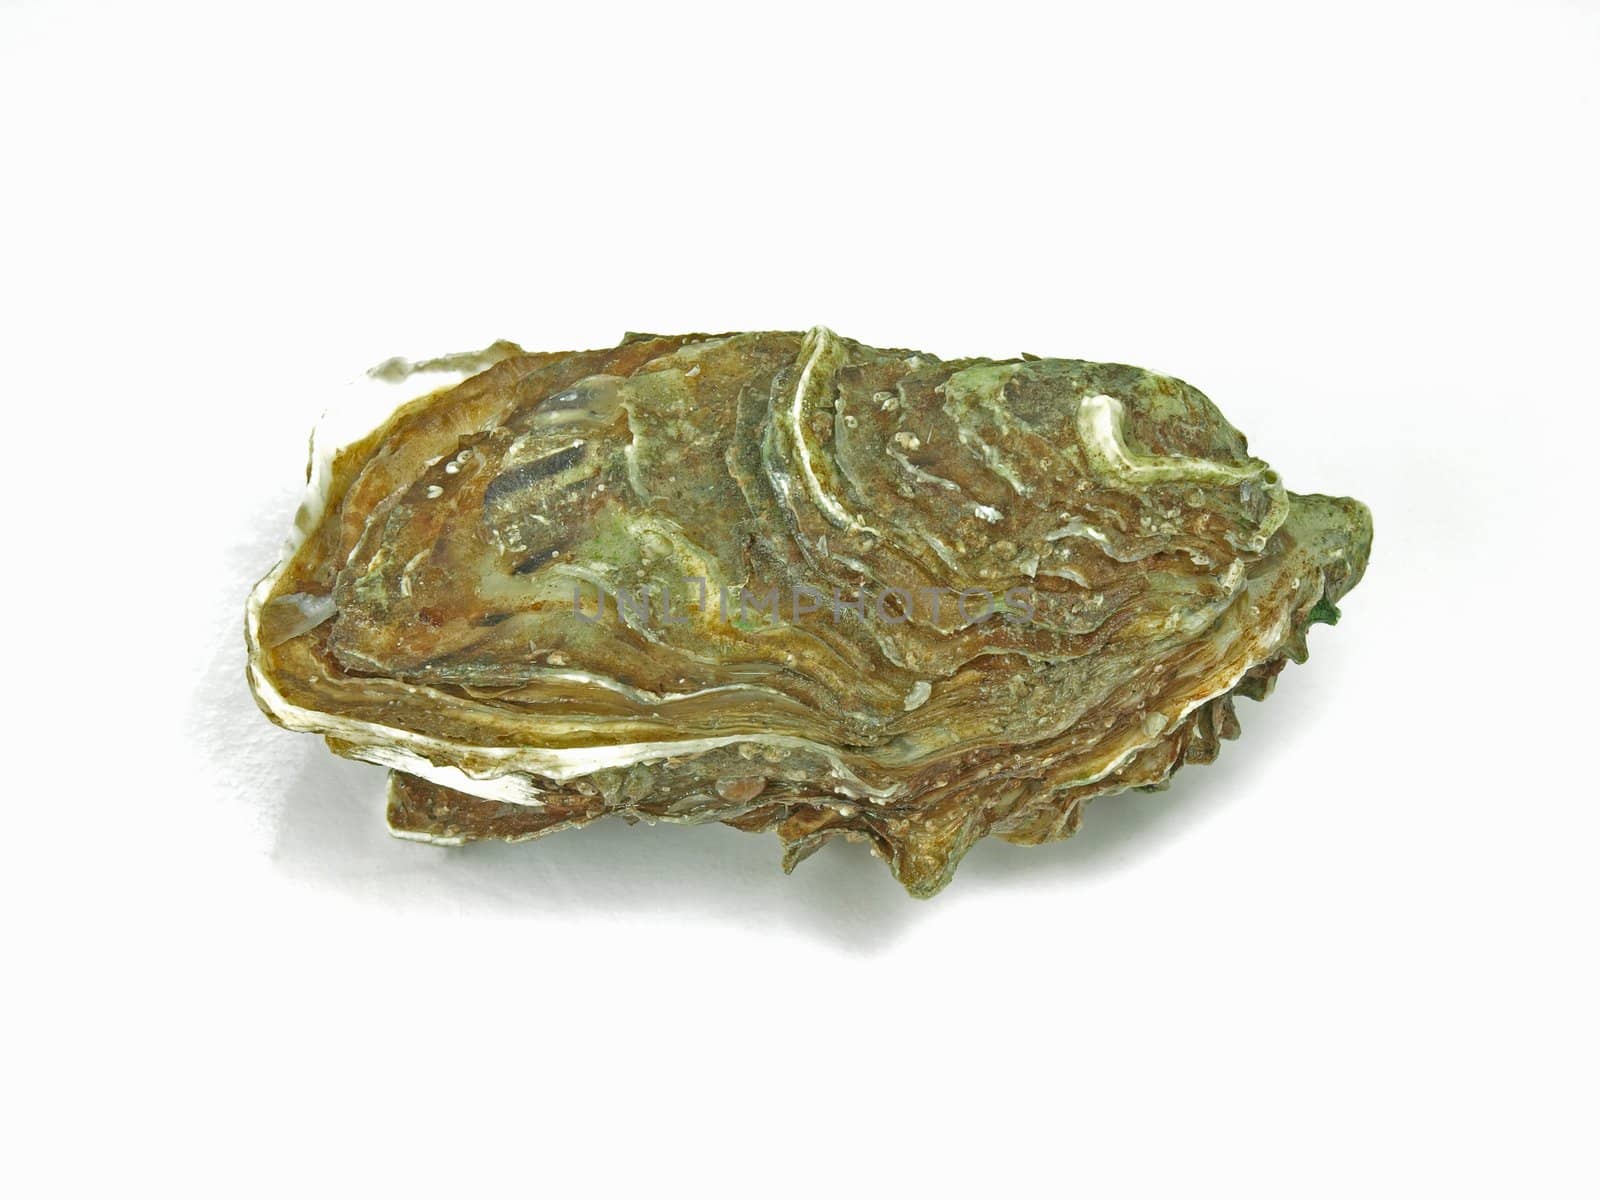 a single fresh oyster on white background